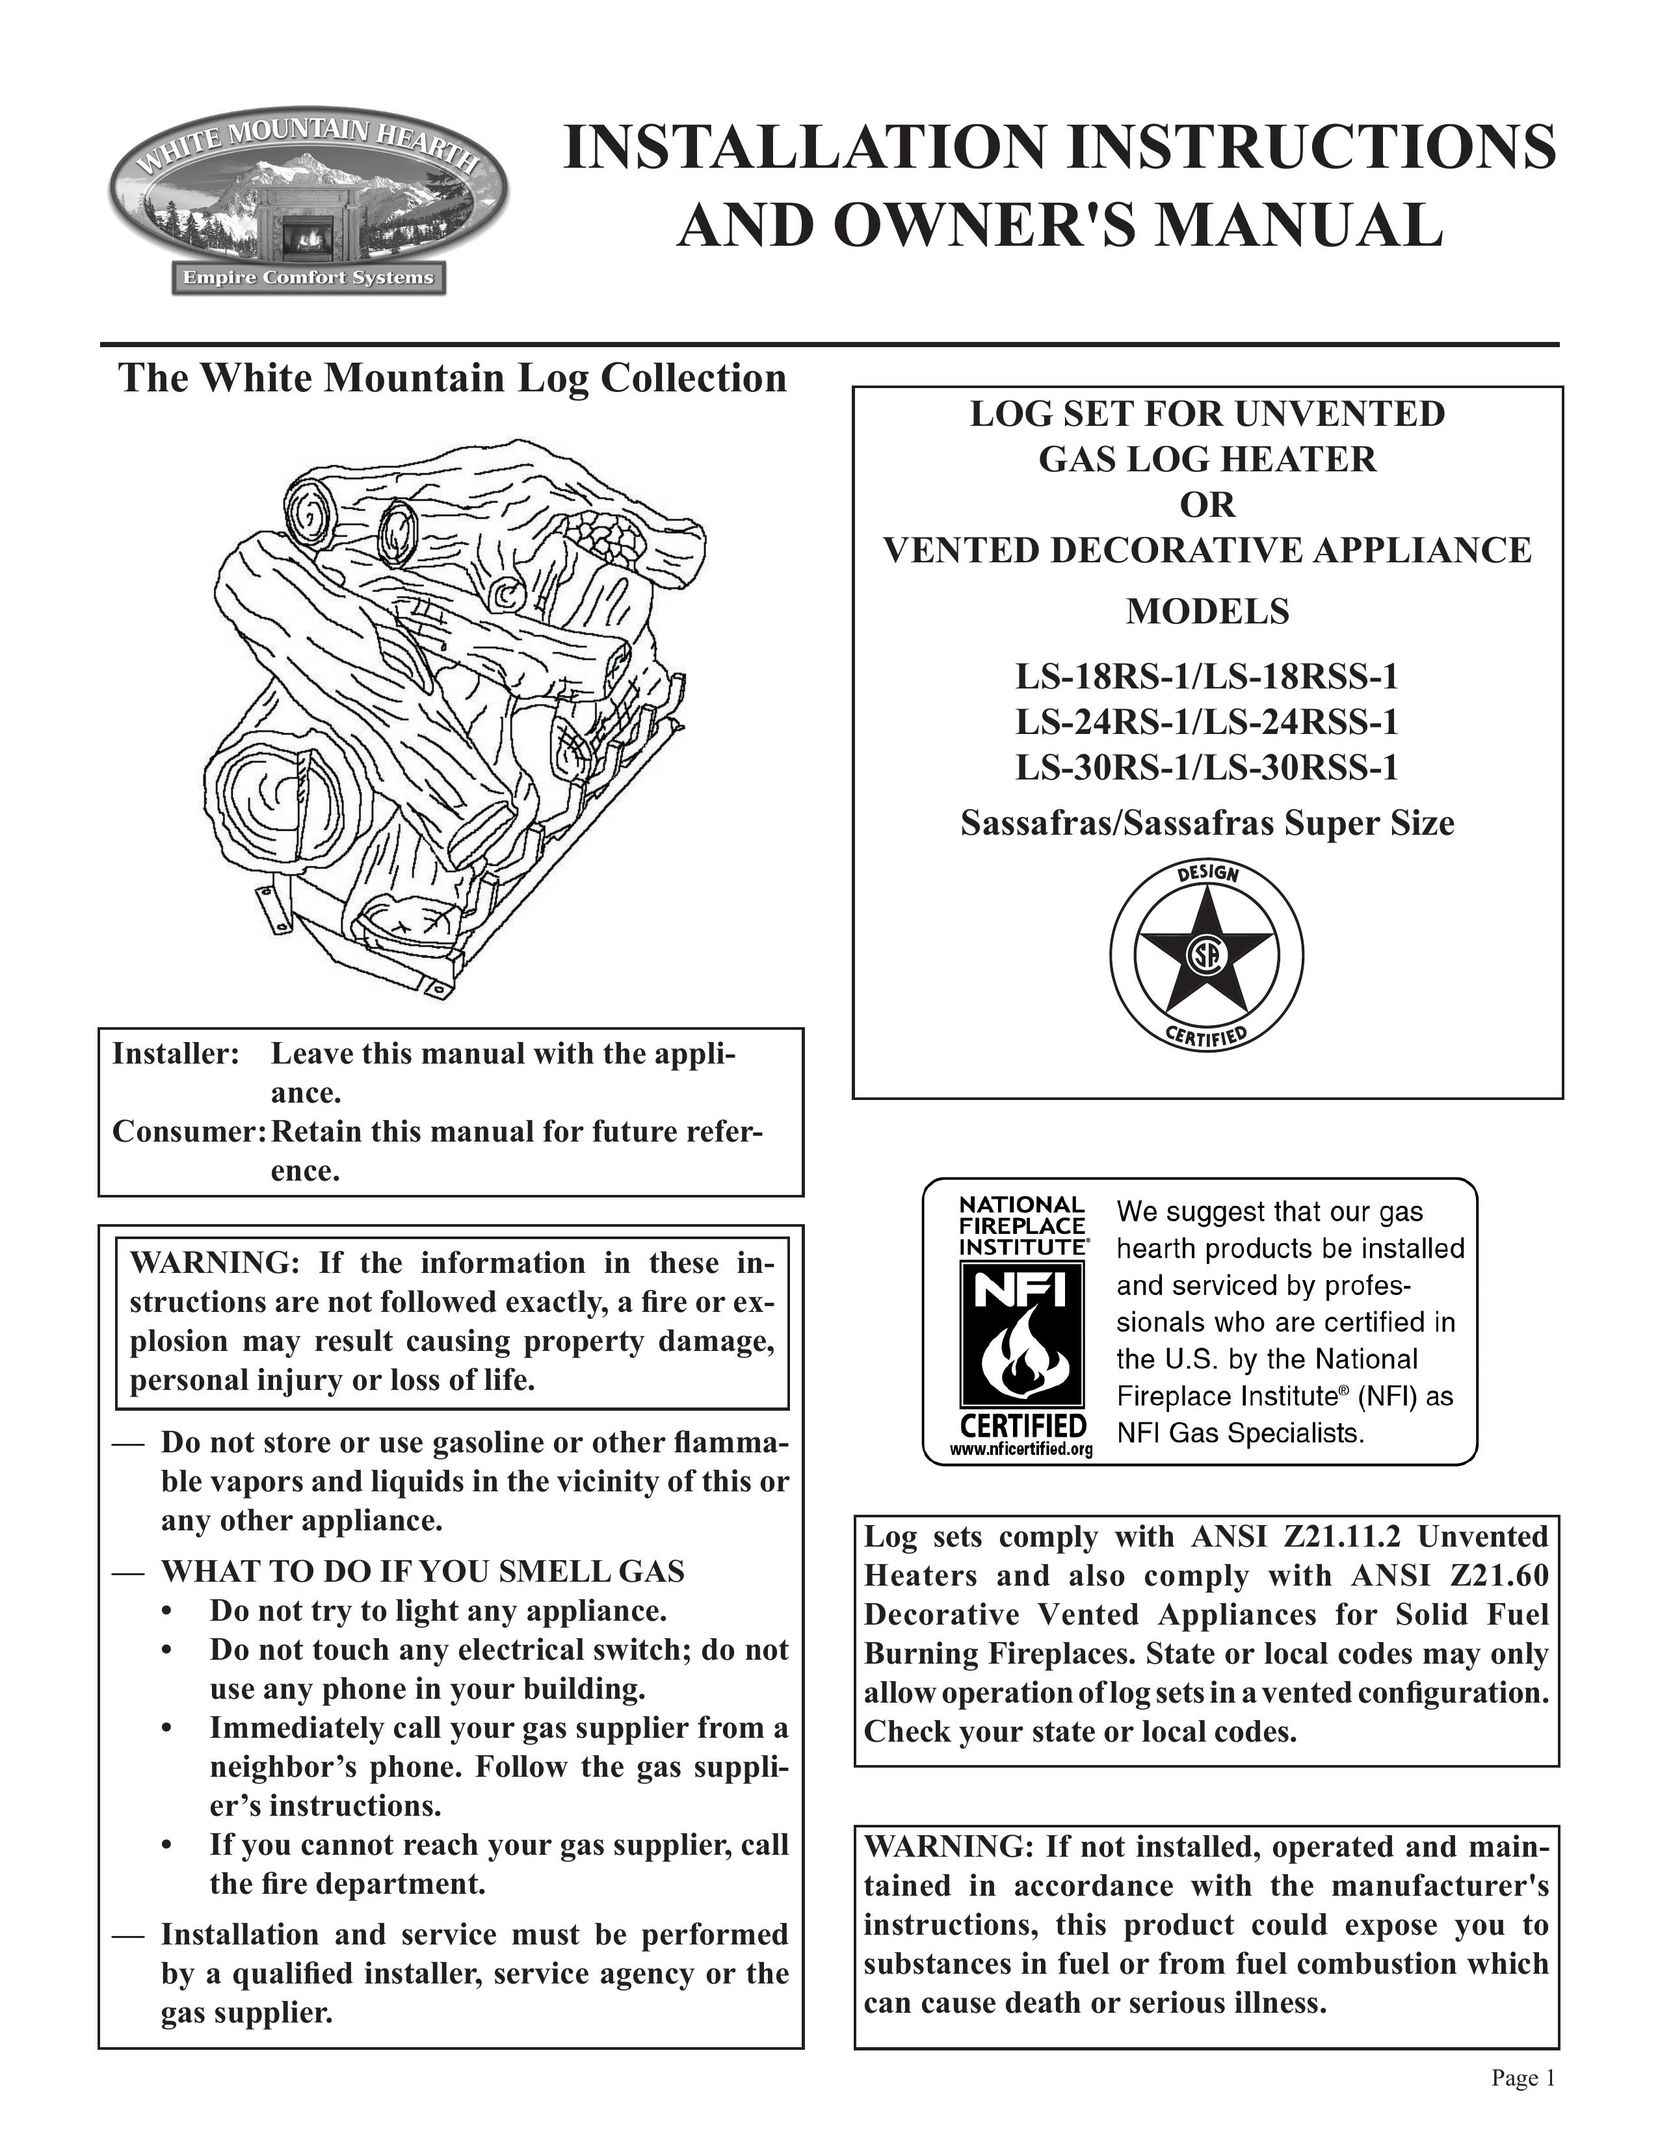 Empire Comfort Systems LS-30RSS-1 Gas Heater User Manual